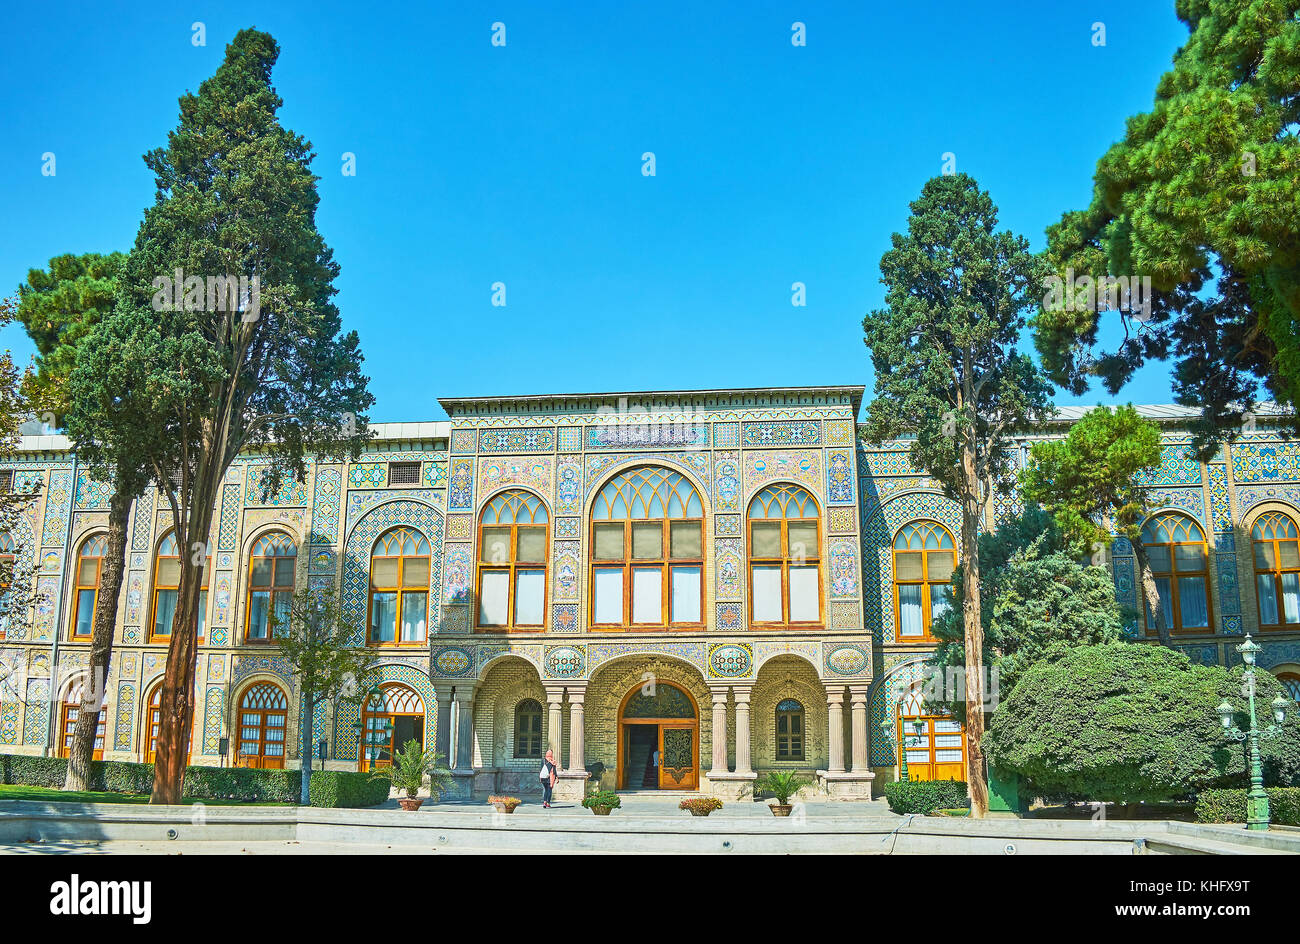 The facade of Golestan palace with scenic portico, decorated with stone columns, reliefs and tiled patterns, Tehran, Iran. Stock Photo